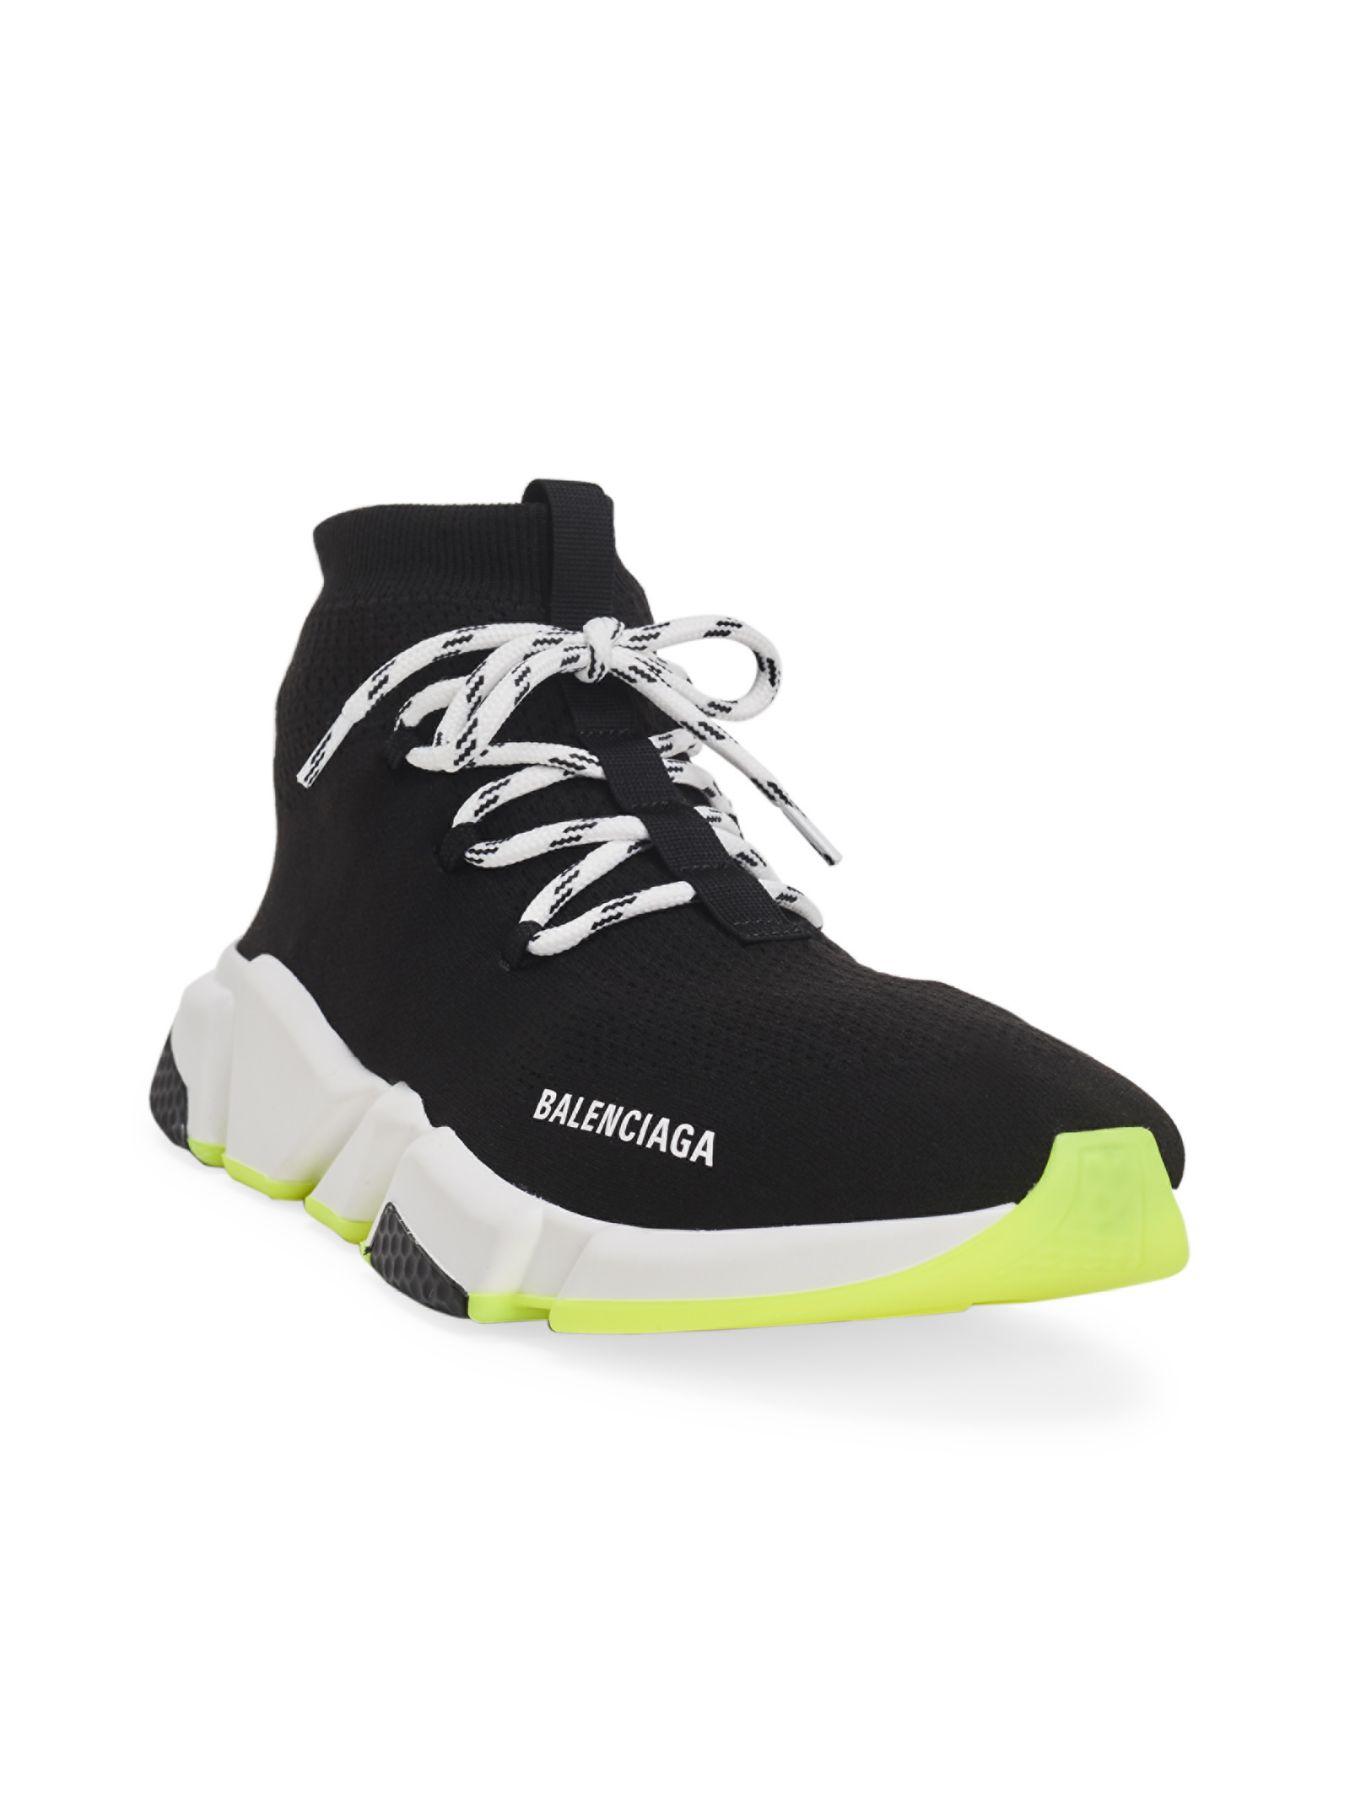 Balenciaga Synthetic Speed Knit Lace-up Sneakers in Black for Men - Lyst